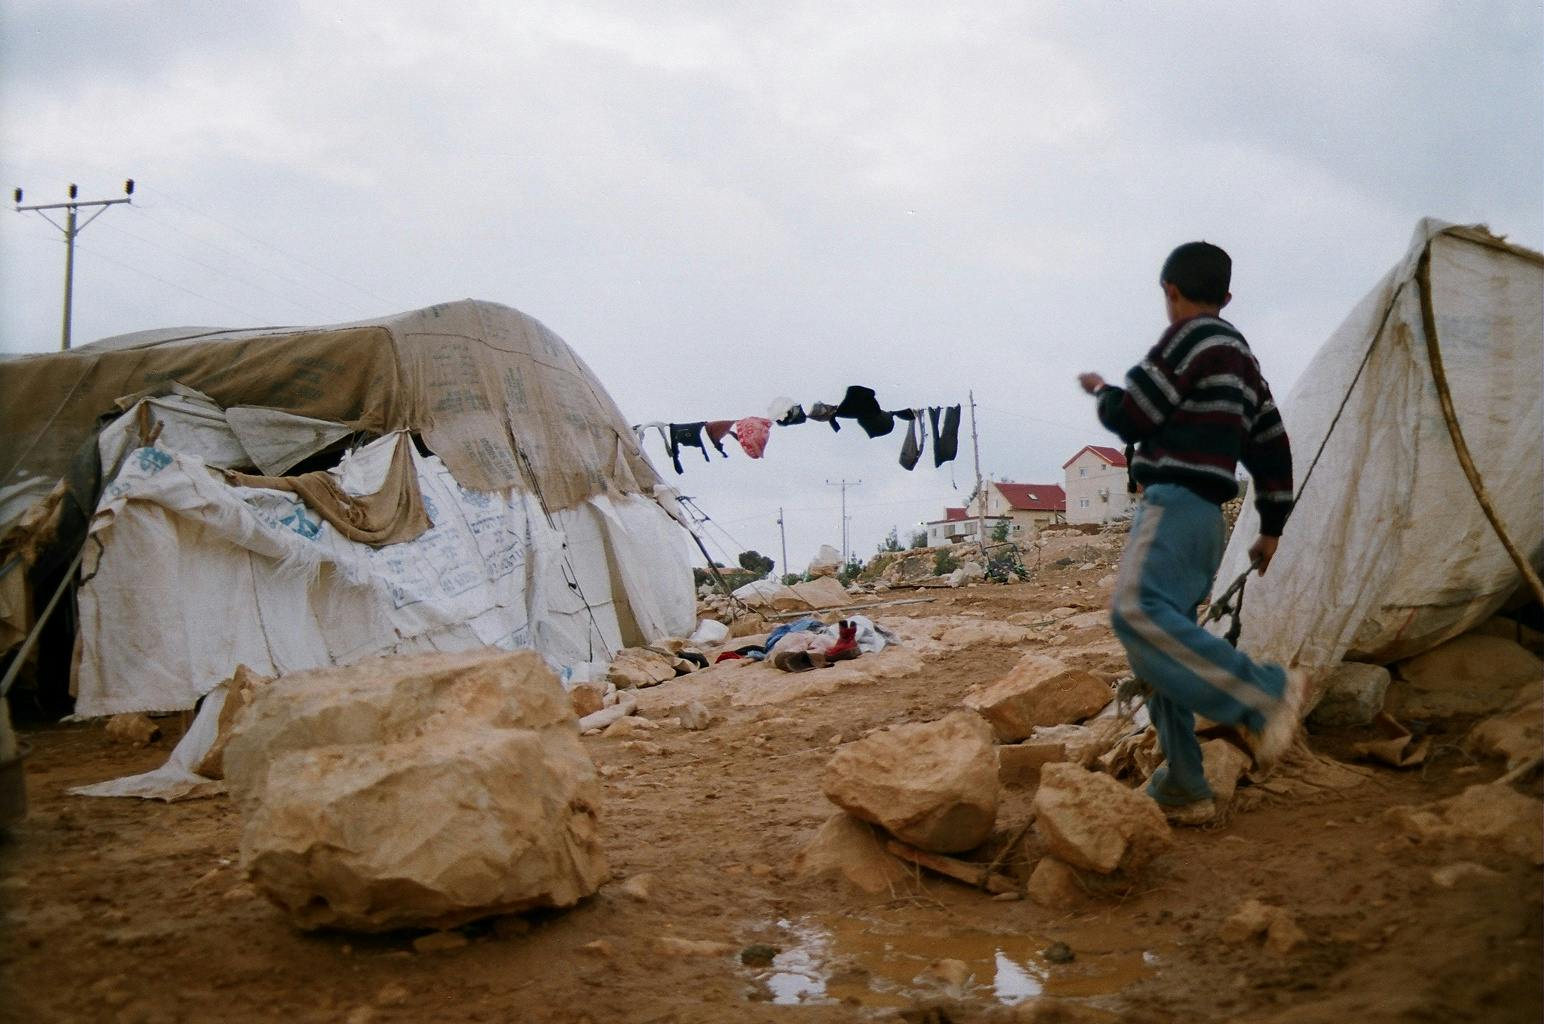 A boy walking through a camp with tents.